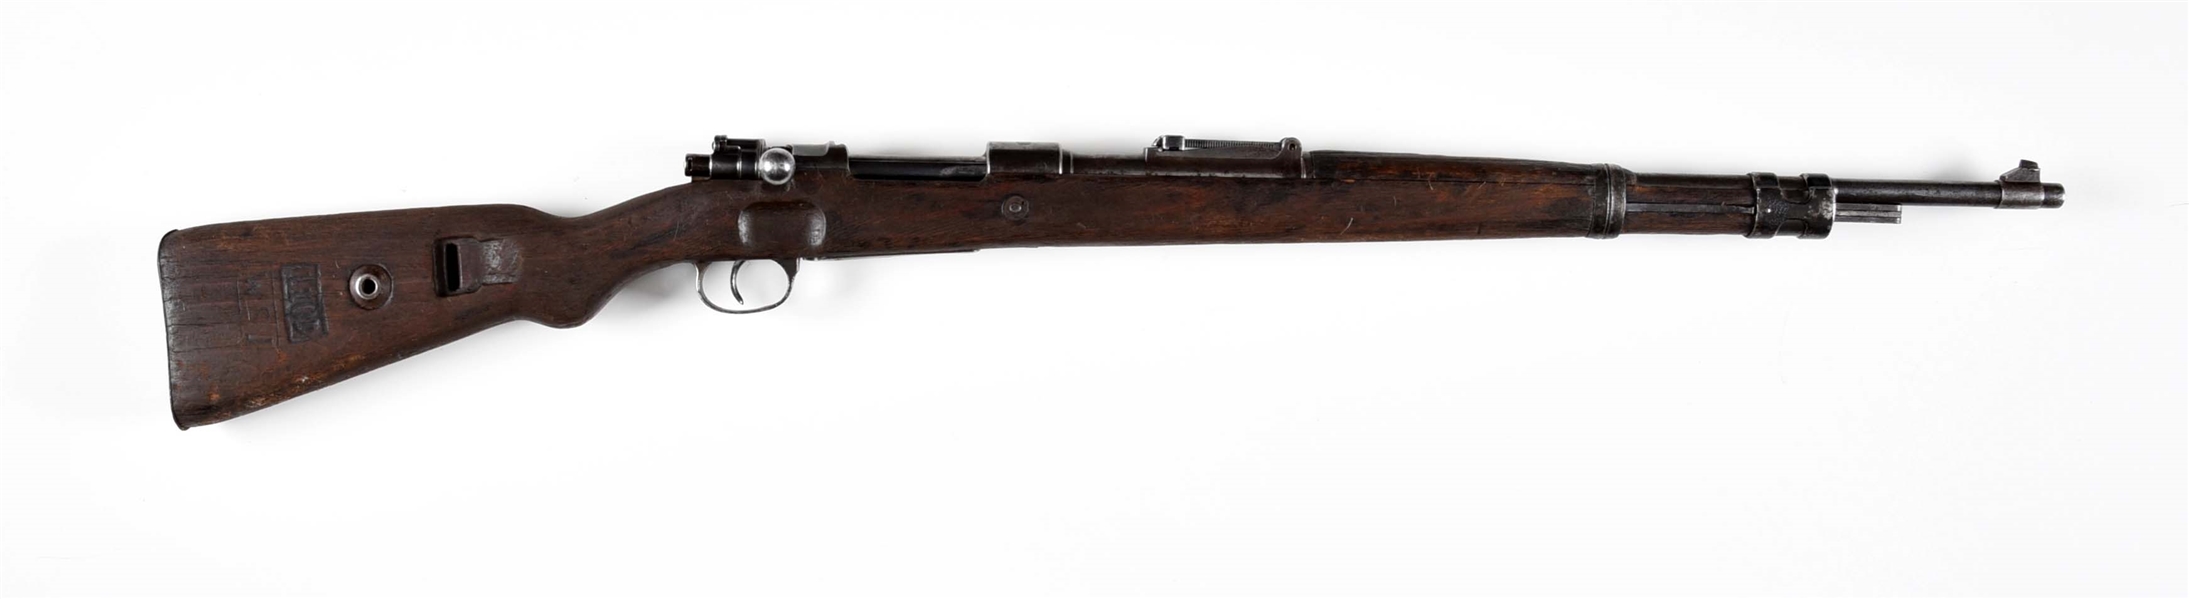 (C) REPUBLIC OF CHINA MAUSER STANDARD MODELL BOLT ACTION RIFLE.